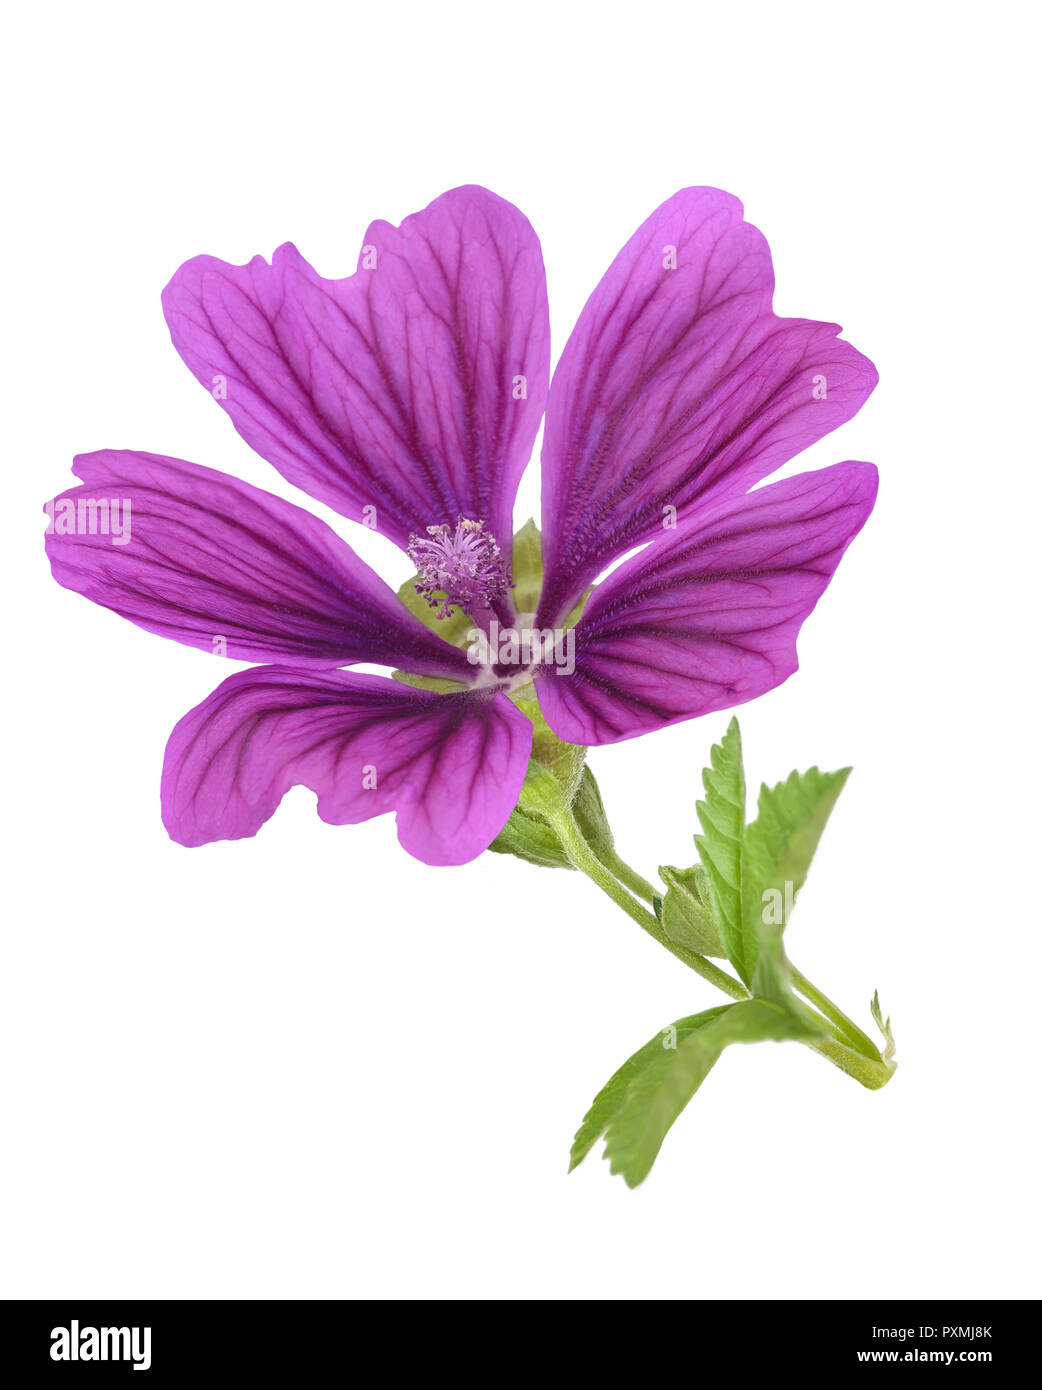 Mallow plante avec flower isolated on white Banque D'Images